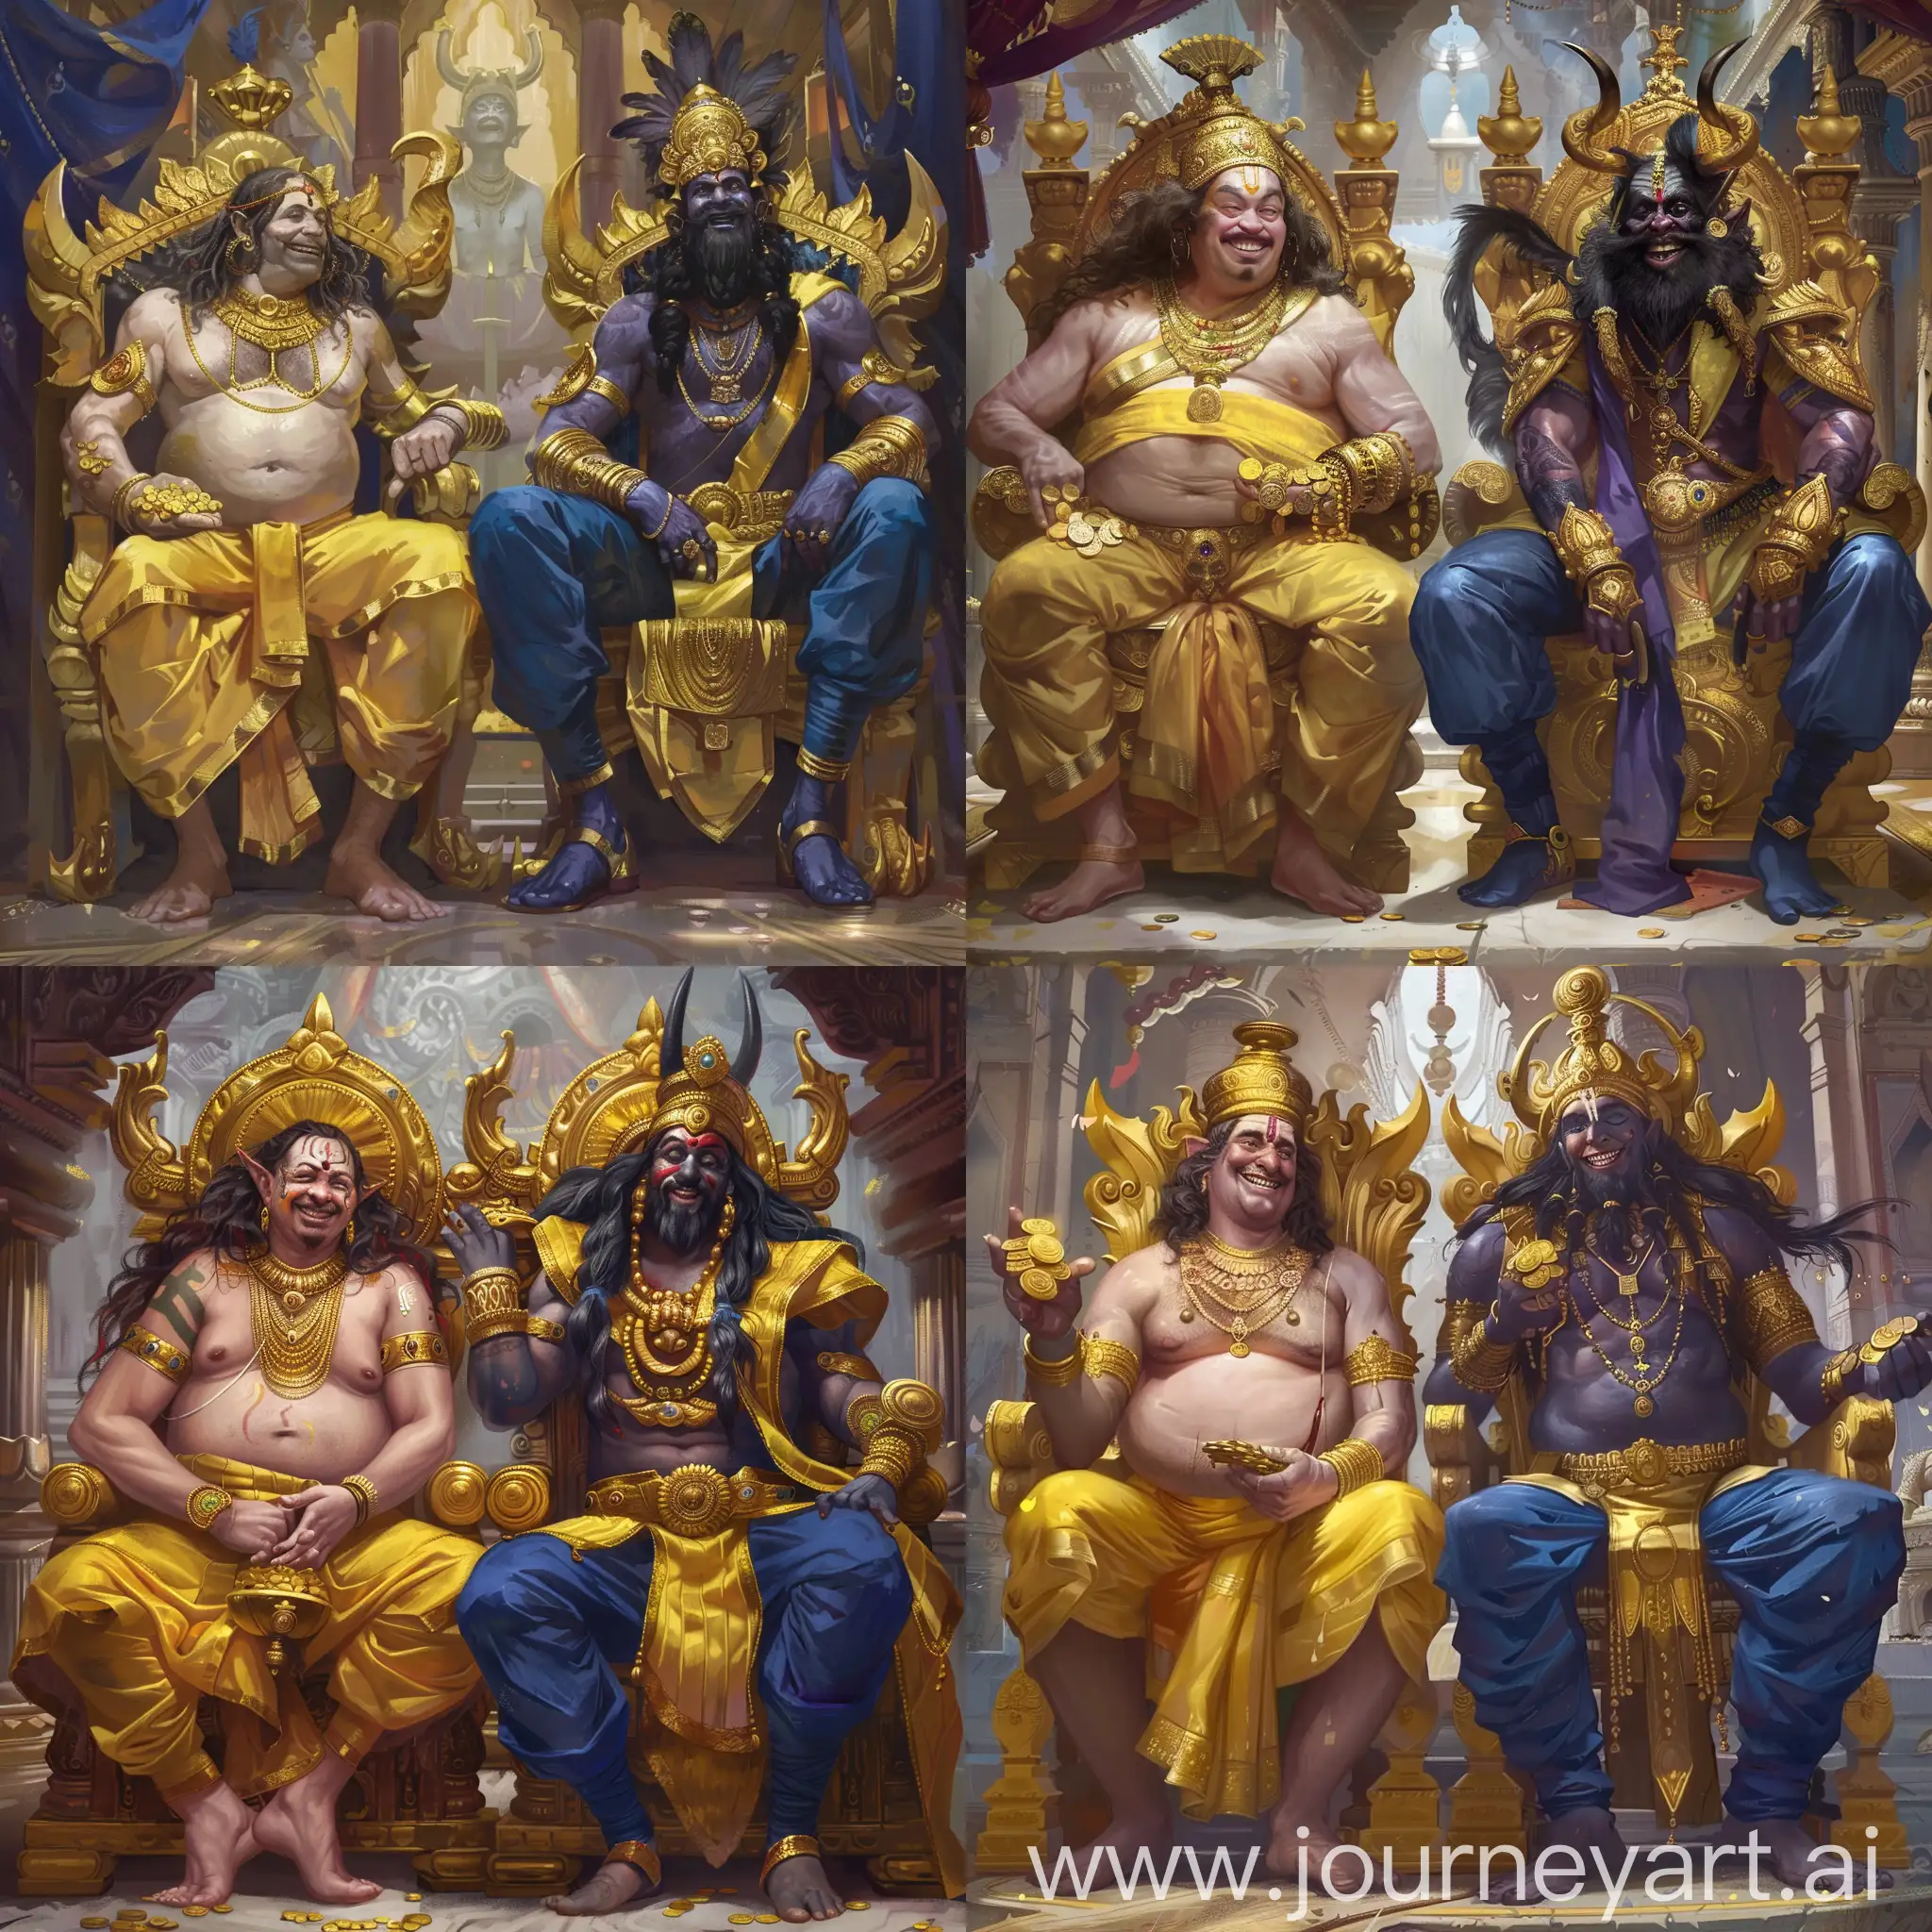 Two persons are sitting on their golden demonic thrones next to each other:

At left, a chubby middle-aged ancient Indian lord Kubera, he doesn't have any beard, he has pale skin,  he has a golden crown and long black hair, he has yellow clothes and pants, he is smiling and he holds golden coins in his hands.

At right, an ancient Hindu demon king Ravana, this demon king has dark brown-purple color skin, long black hair and beard, wears golden Hindu crown and armor, deep blue pants and boots.

They are both inside a splendid demonic Hindu temple.